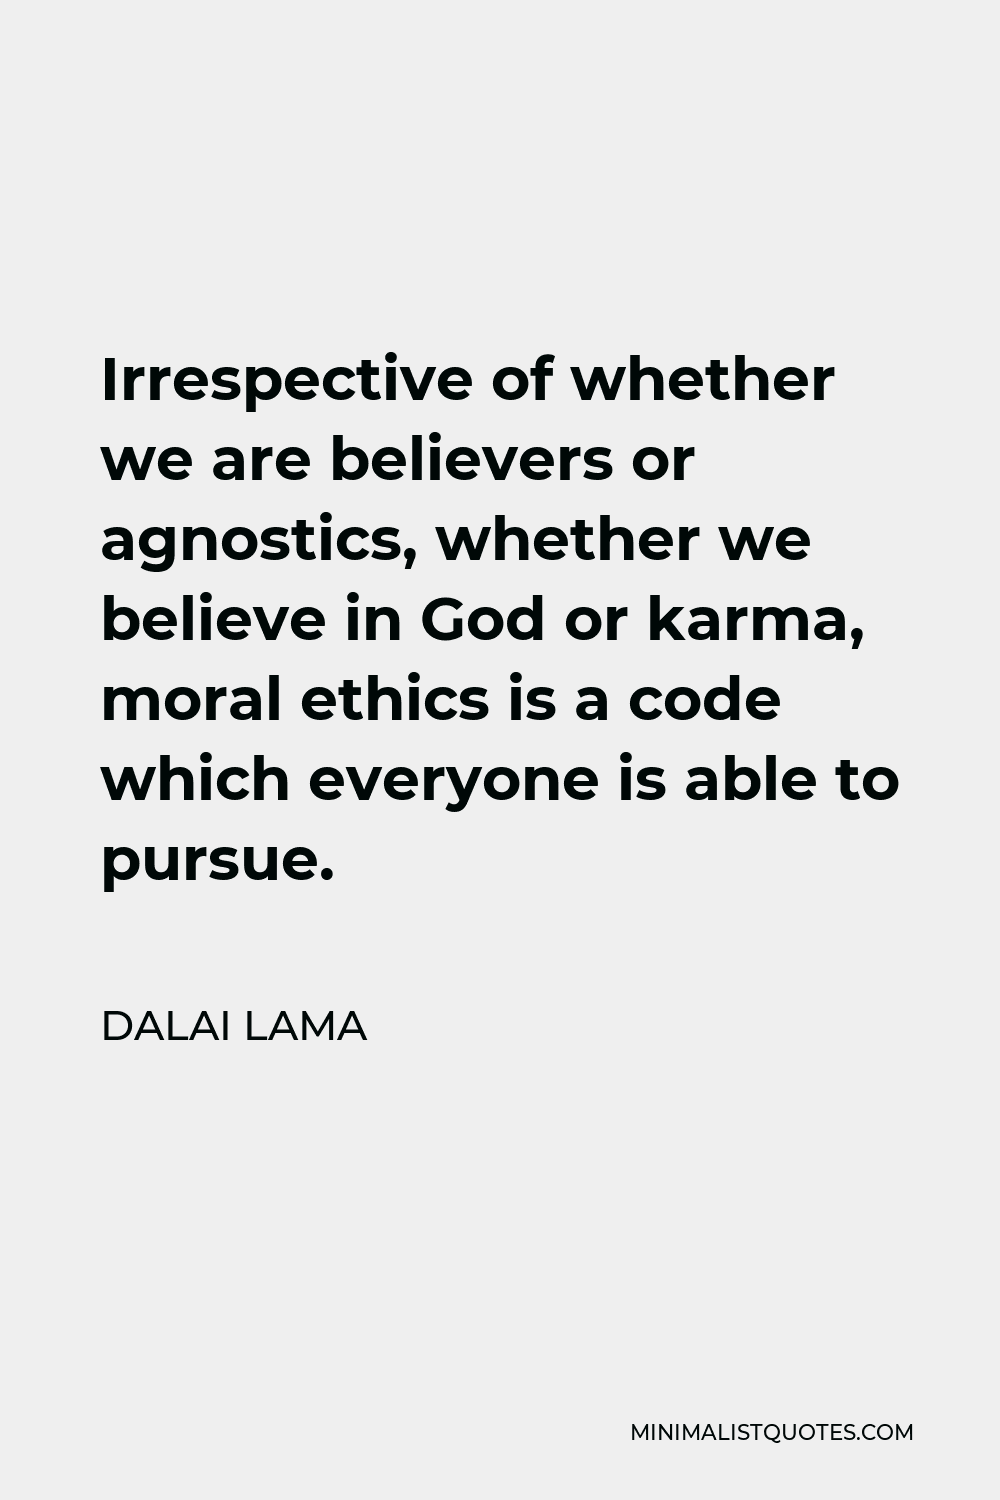 Dalai Lama Quote - Irrespective of whether we are believers or agnostics, whether we believe in God or karma, moral ethics is a code which everyone is able to pursue.